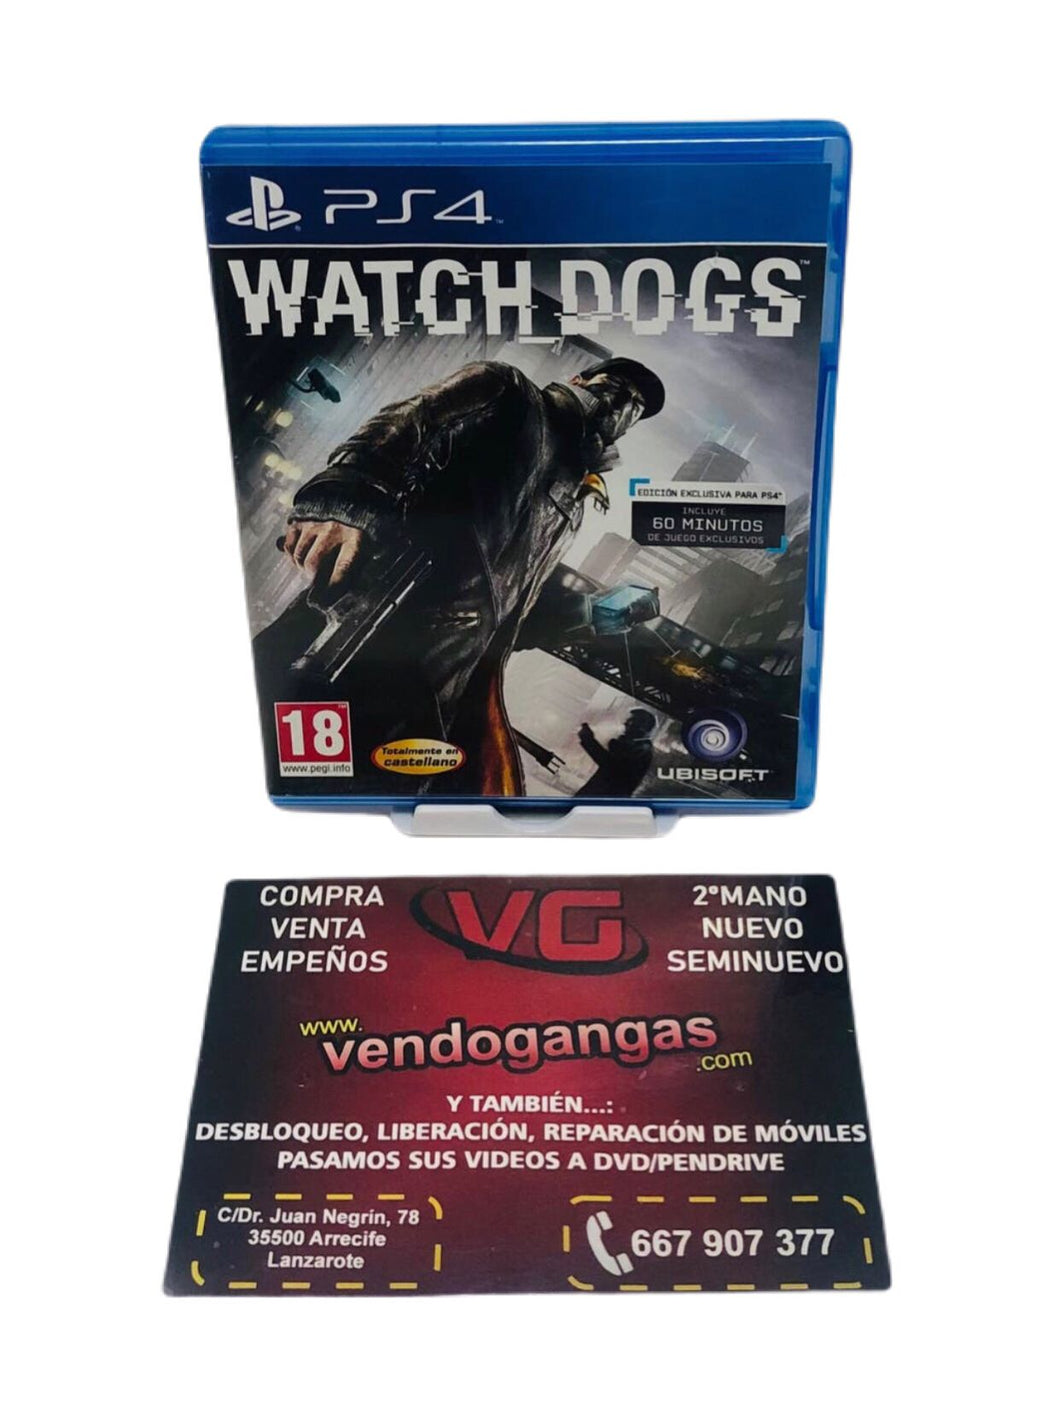 WATCH DOGS SONY PS4